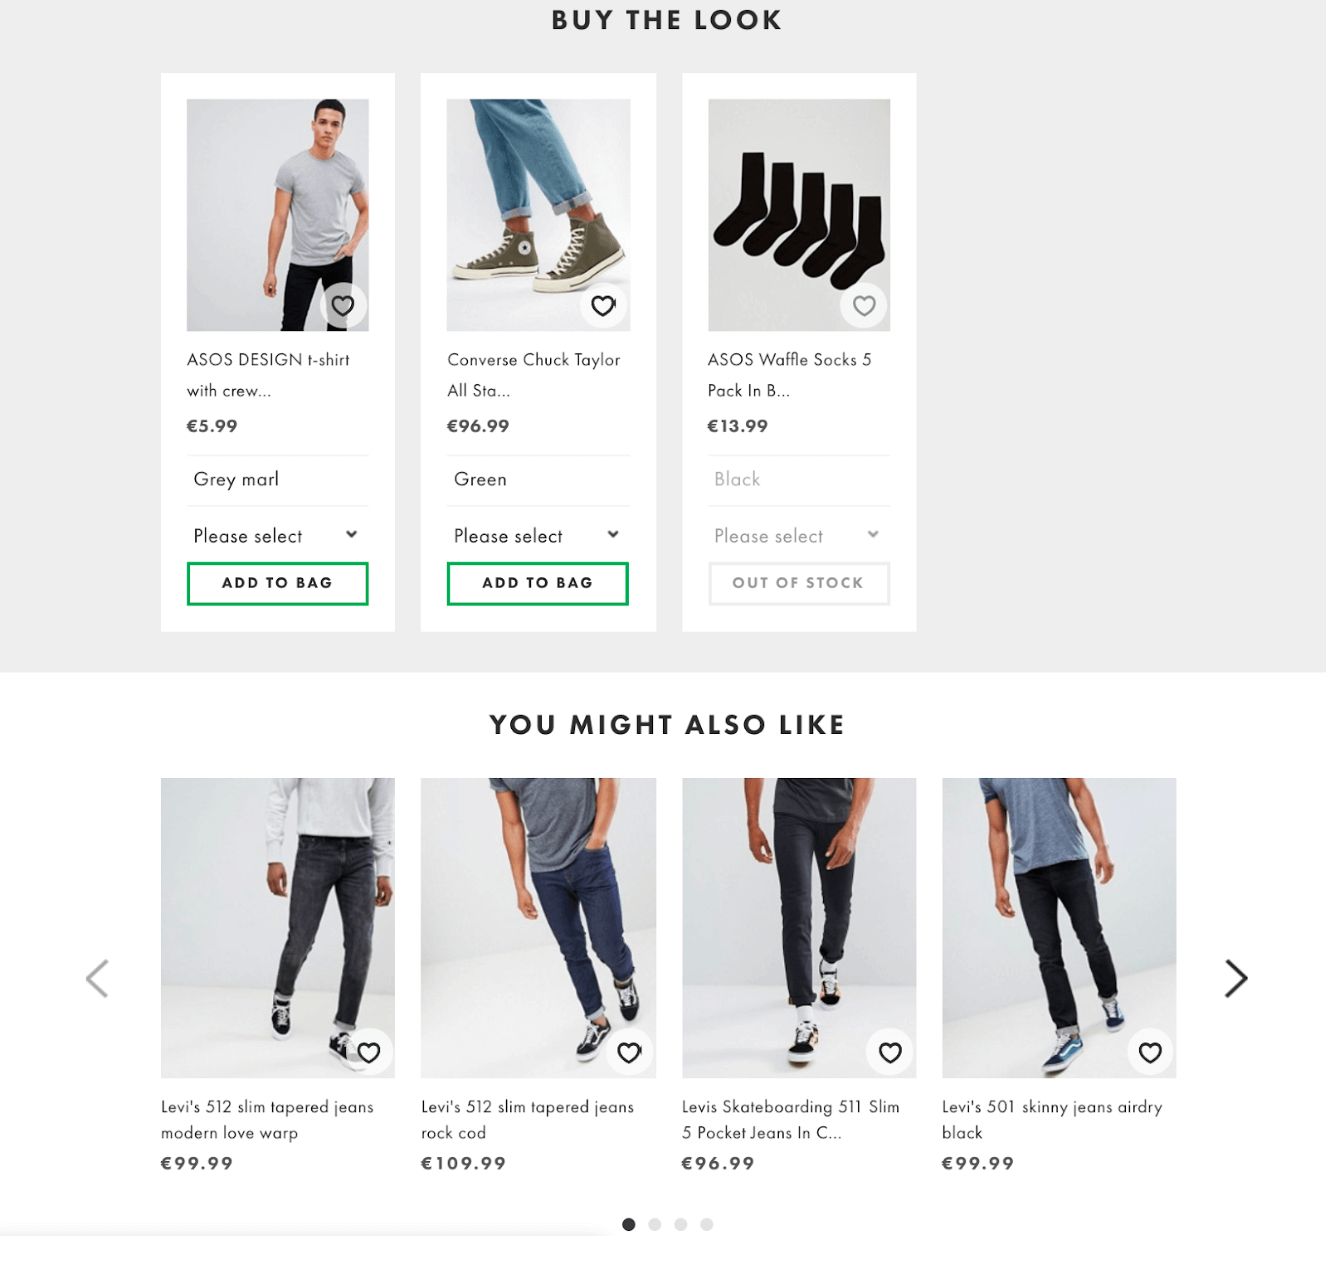 Asos allows users to shop the look on their fashion ecommerce site.